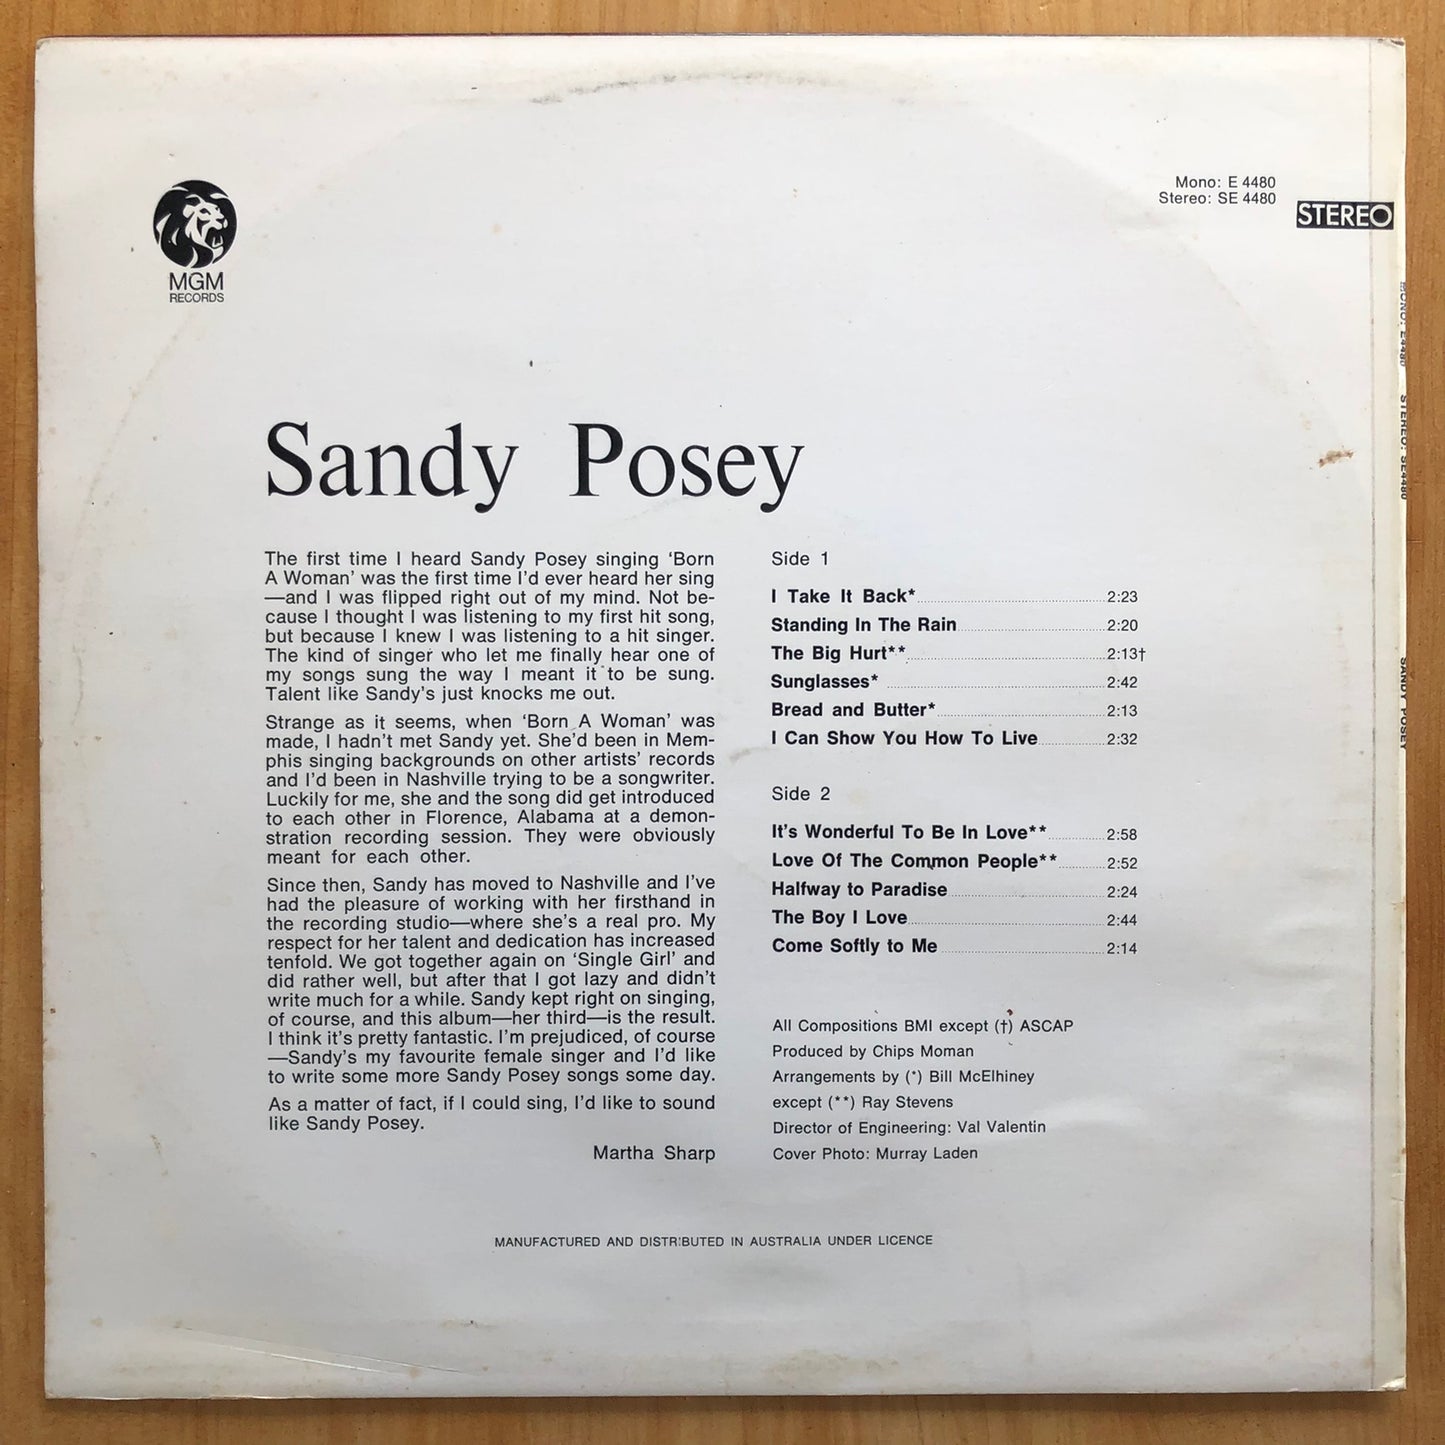 Sandy Posey - Sandy Posey featuring 'I Take It Back'